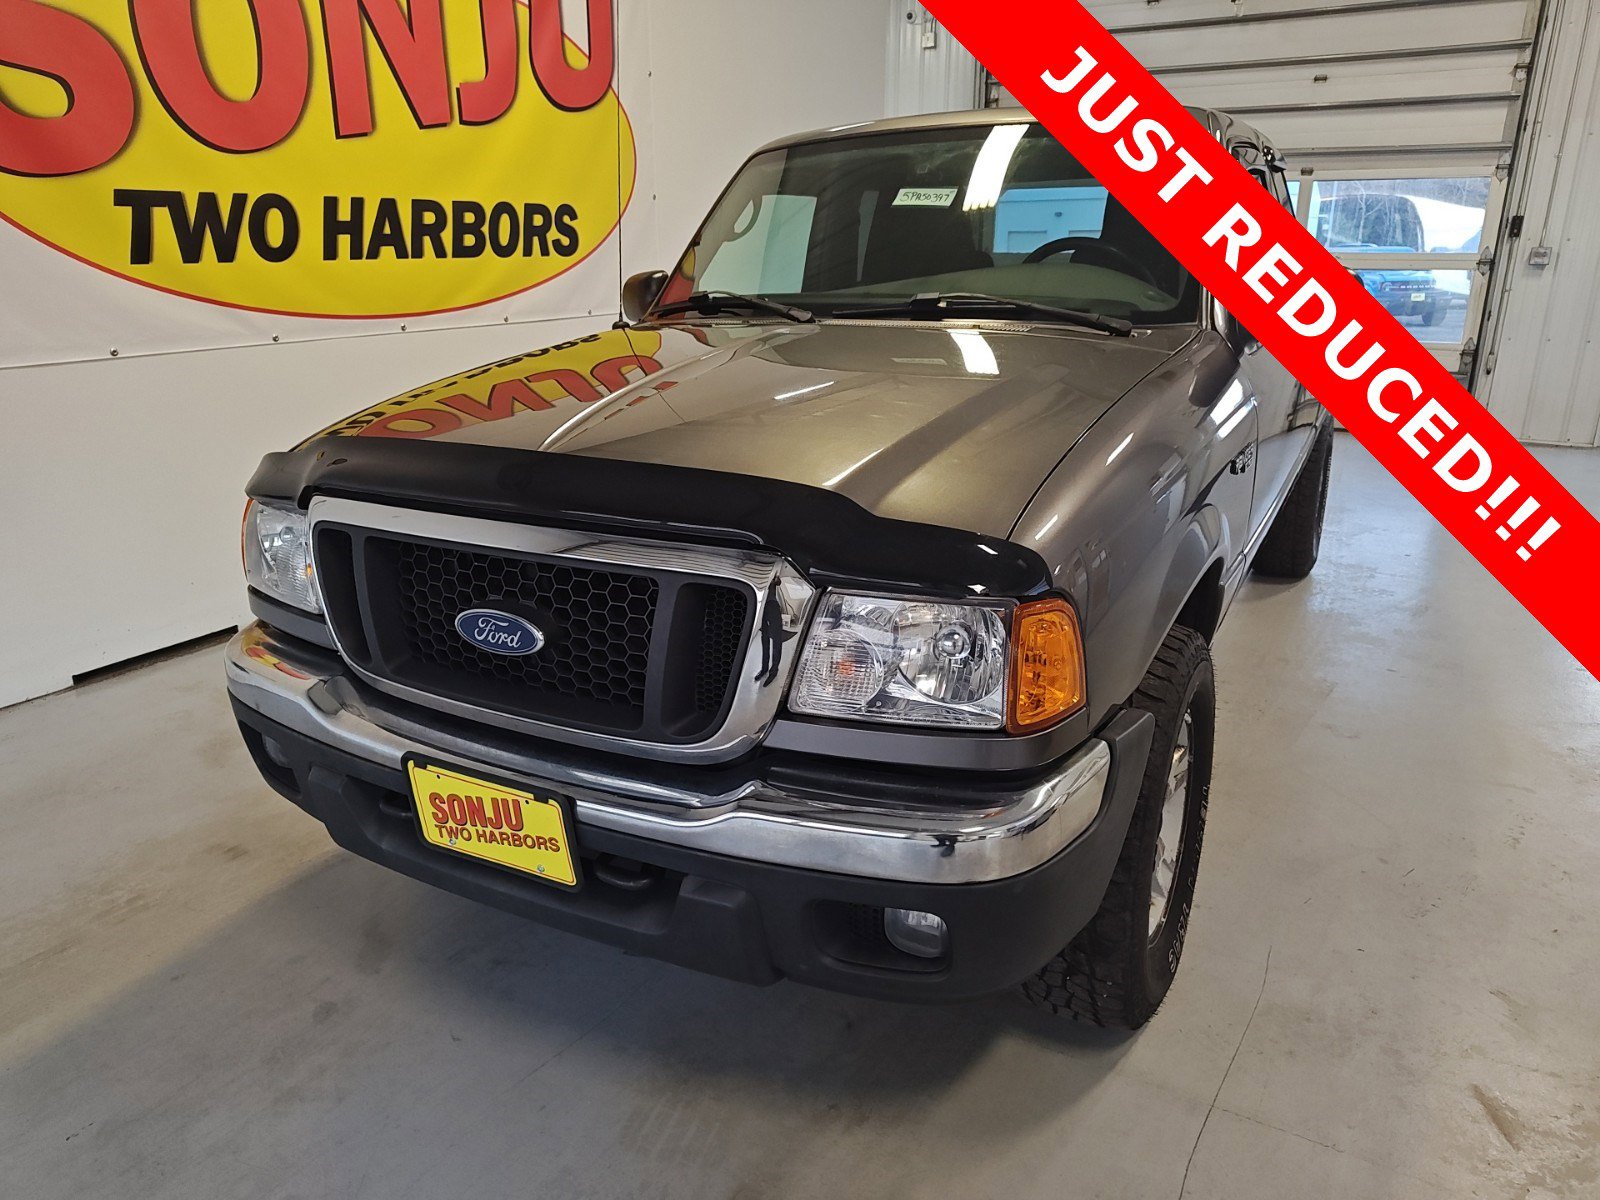 Used 2005 Ford Ranger XL with VIN 1FTZR15E75PA50397 for sale in Two Harbors, Minnesota